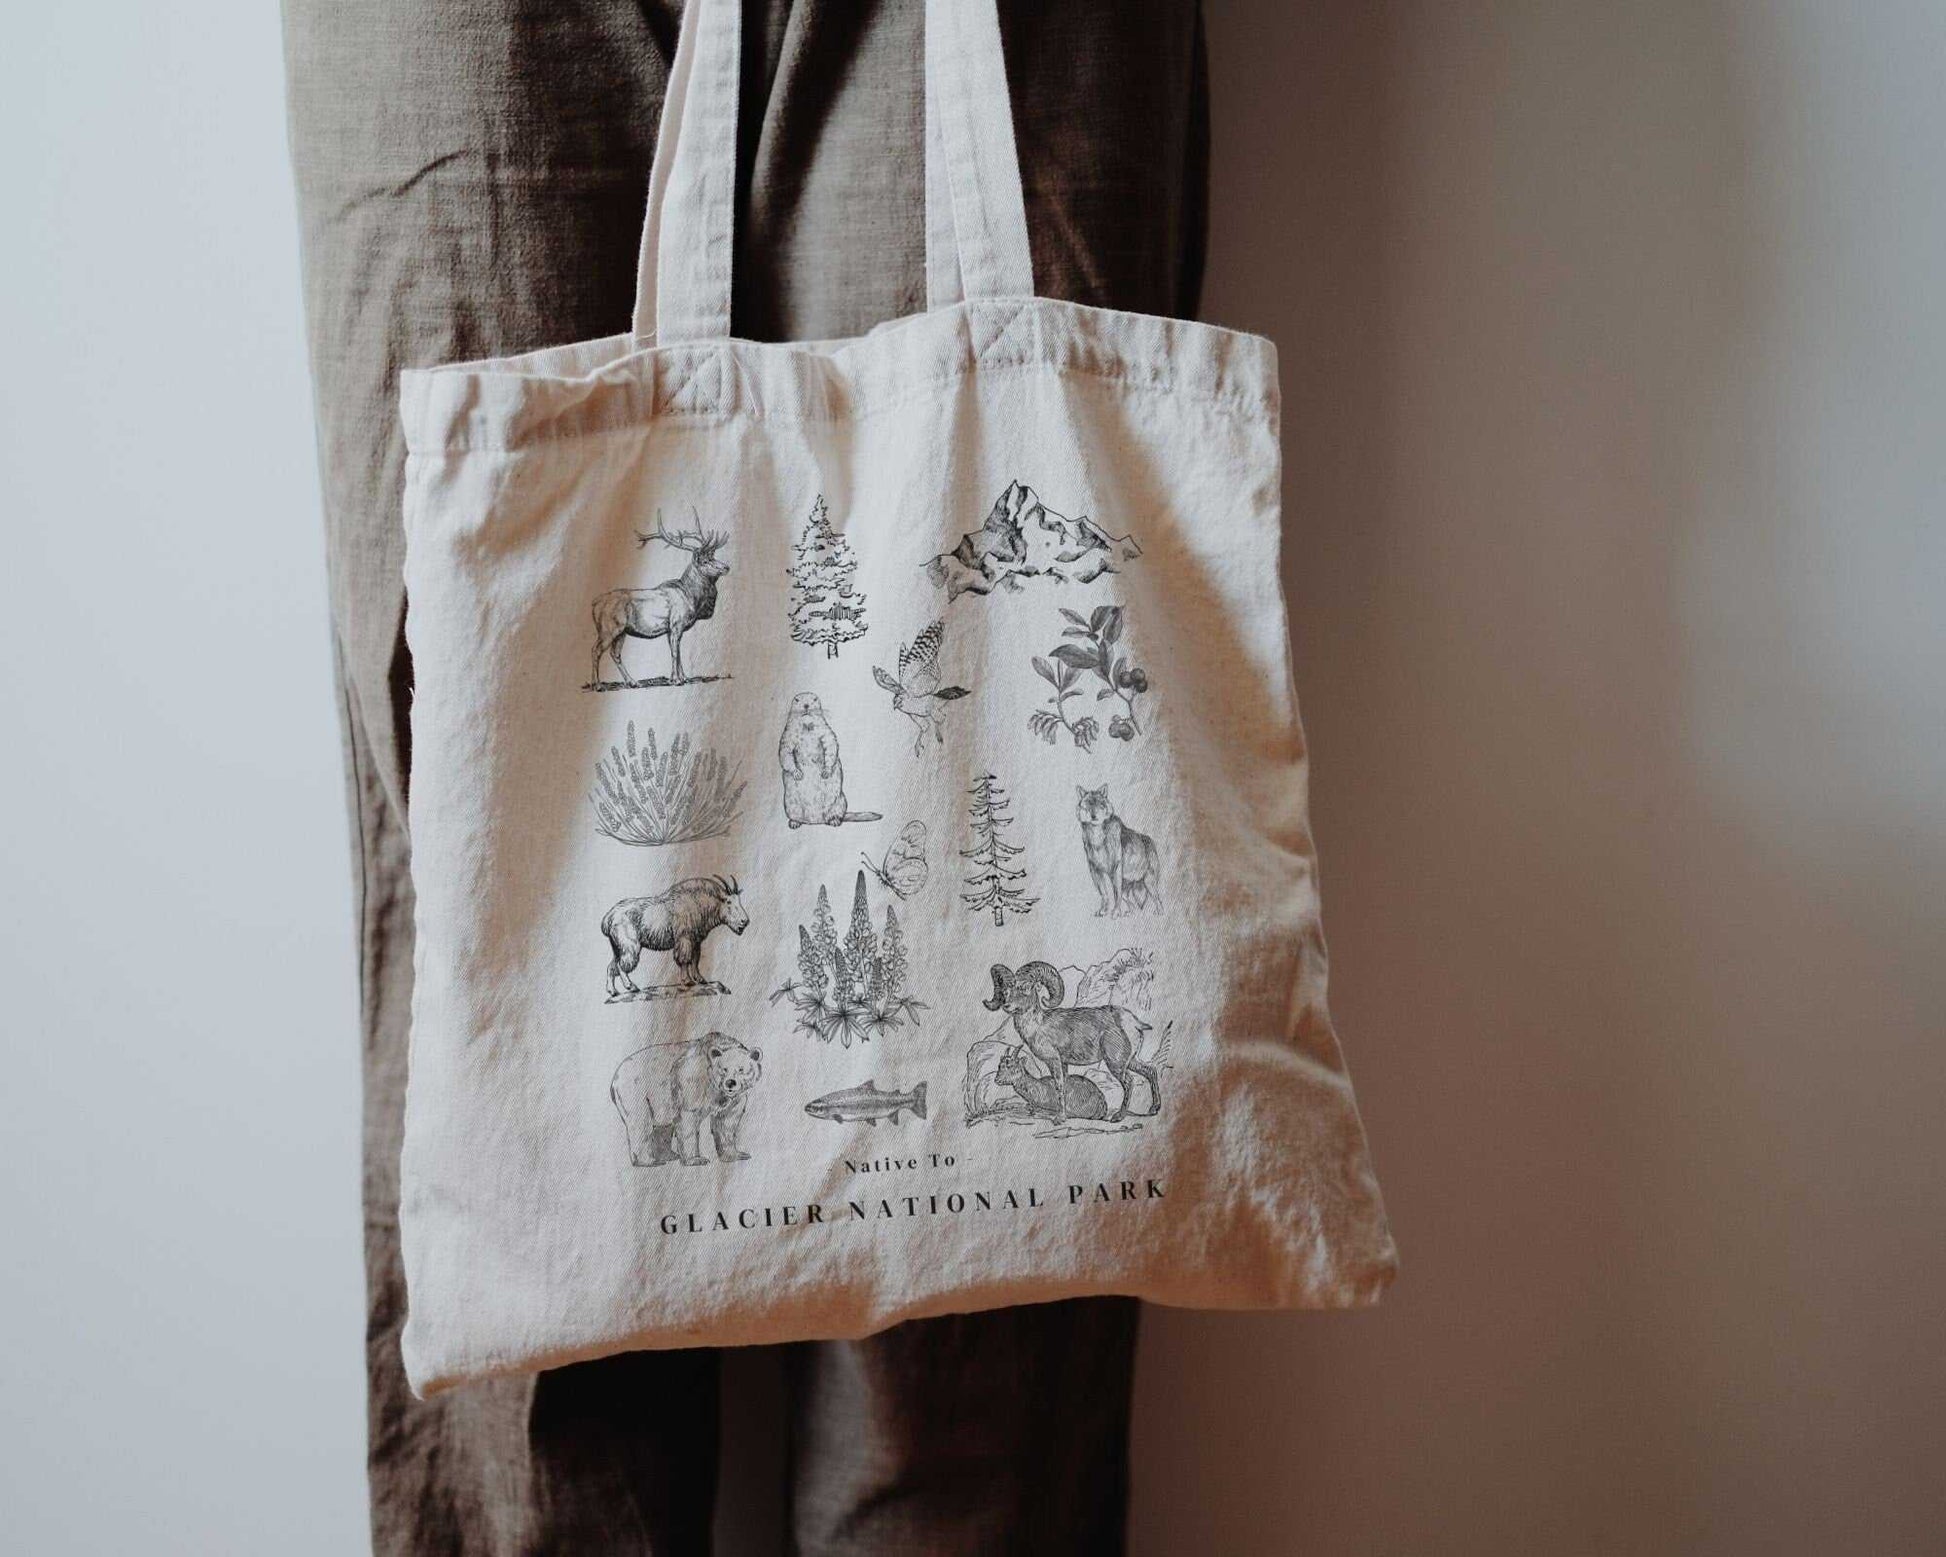 Glacier National Park ToteThese organic cotton tote bags feature the iconic flora and fauna of Glacier National Park in the state of Montana.
Details:
- 15.75"h x 15.25"w - handle length of 2